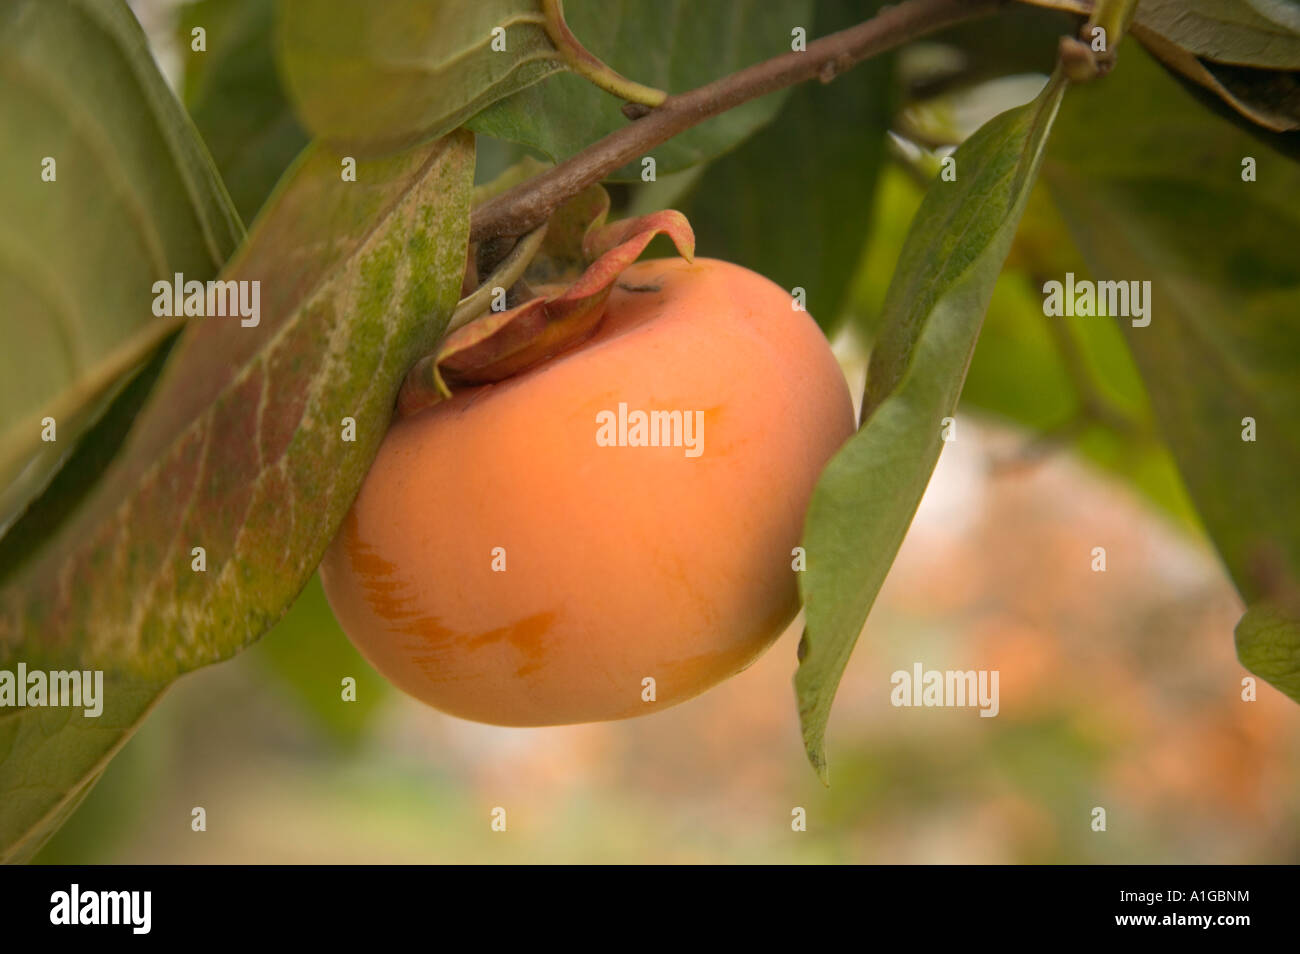 Ripe Persimmons 'Fuyu' on branch, Stock Photo